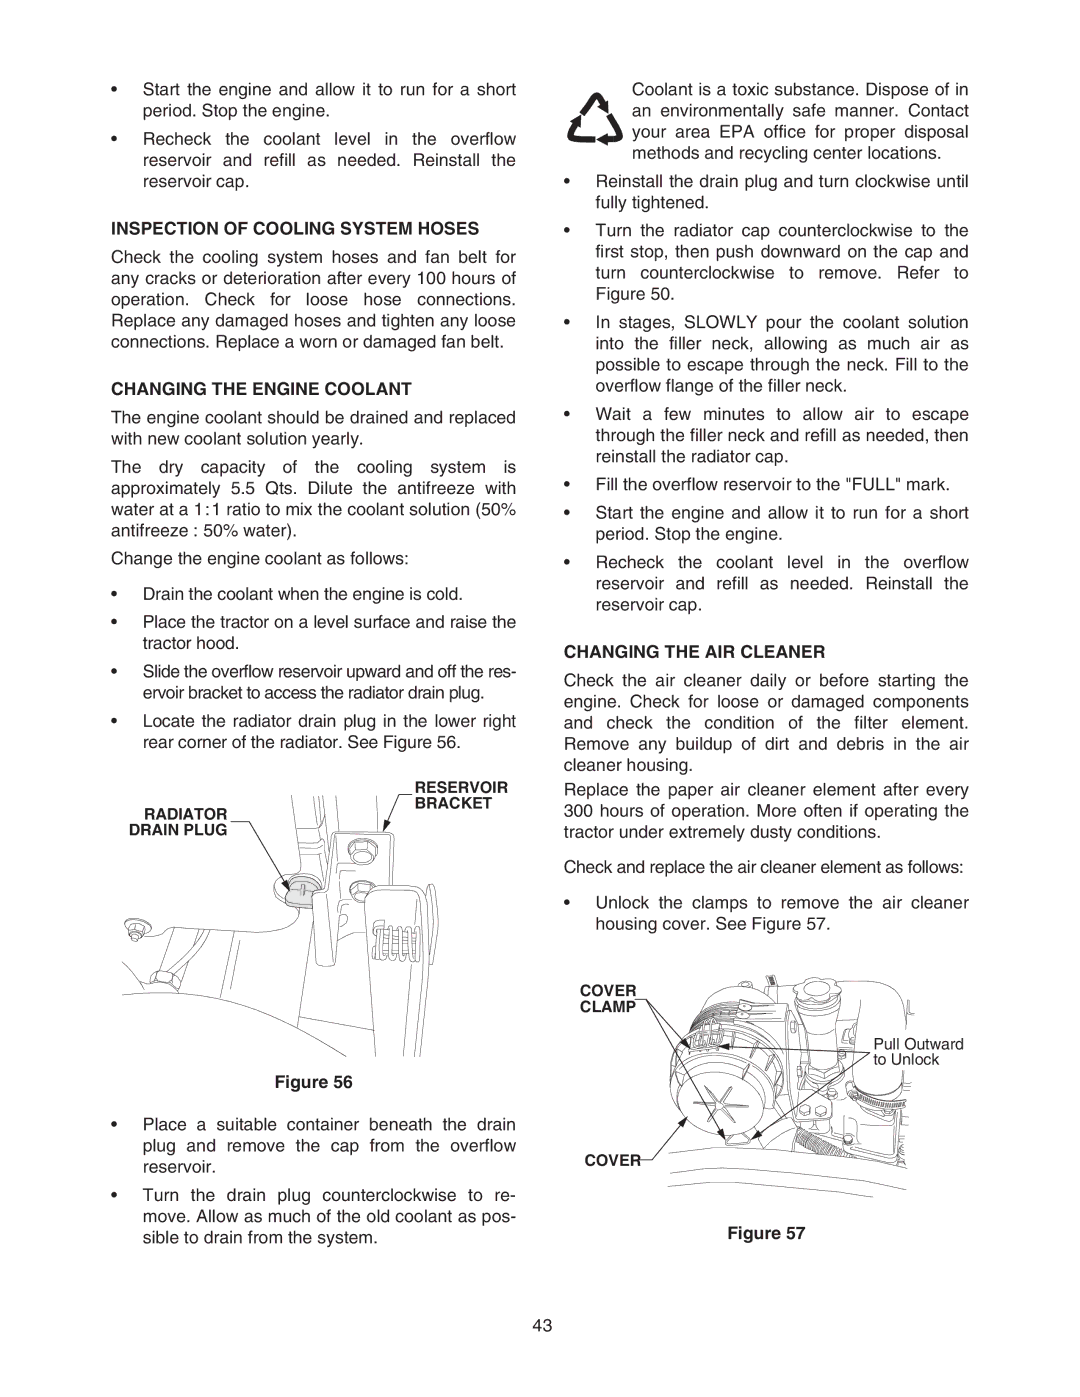 Cub Cadet 6284 manual Inspection of Cooling System Hoses, Changing the Engine Coolant, Changing the AIR Cleaner 